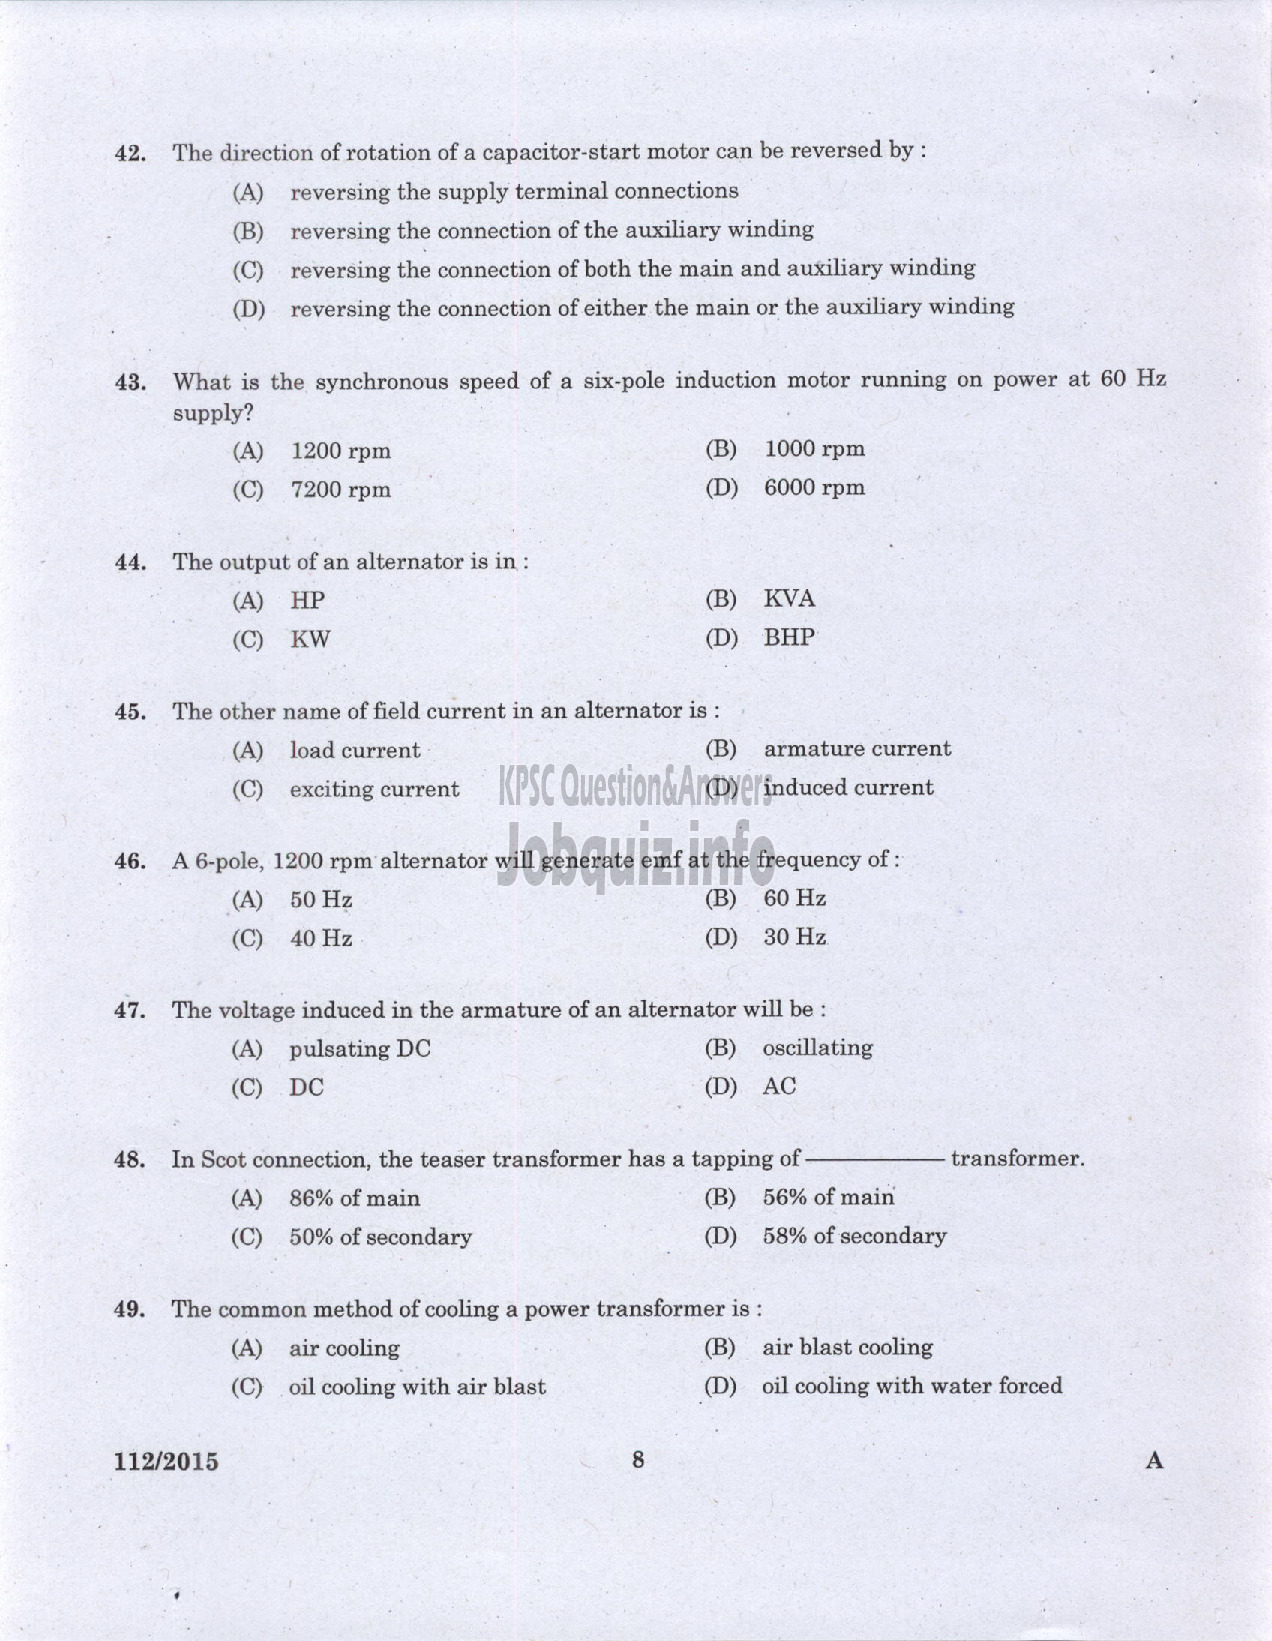 Kerala PSC Question Paper - TRADESMAN ELECTRICAL TECHNICAL EDUCATION/ELECTRICIAN GROUND WATER /ELECTRICIAN GR II PRINTING GOVT PRESSES ELECTRICIAN AGRICULTURE /ELECTRICIAN GR II THE KERALA CERAMICS LTD-6